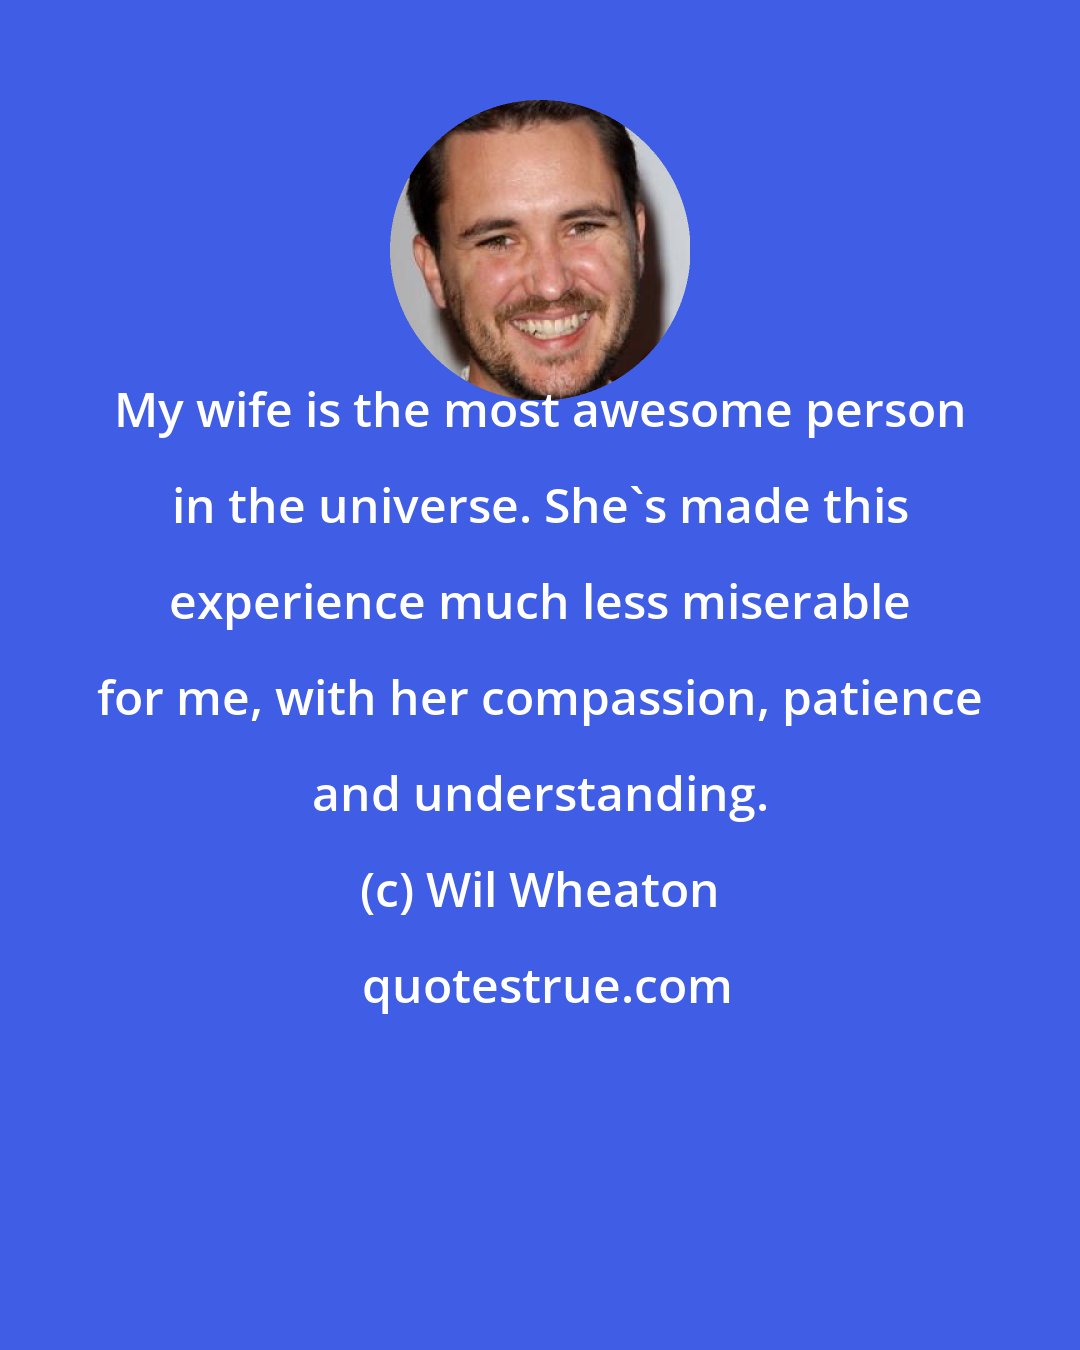 Wil Wheaton: My wife is the most awesome person in the universe. She's made this experience much less miserable for me, with her compassion, patience and understanding.